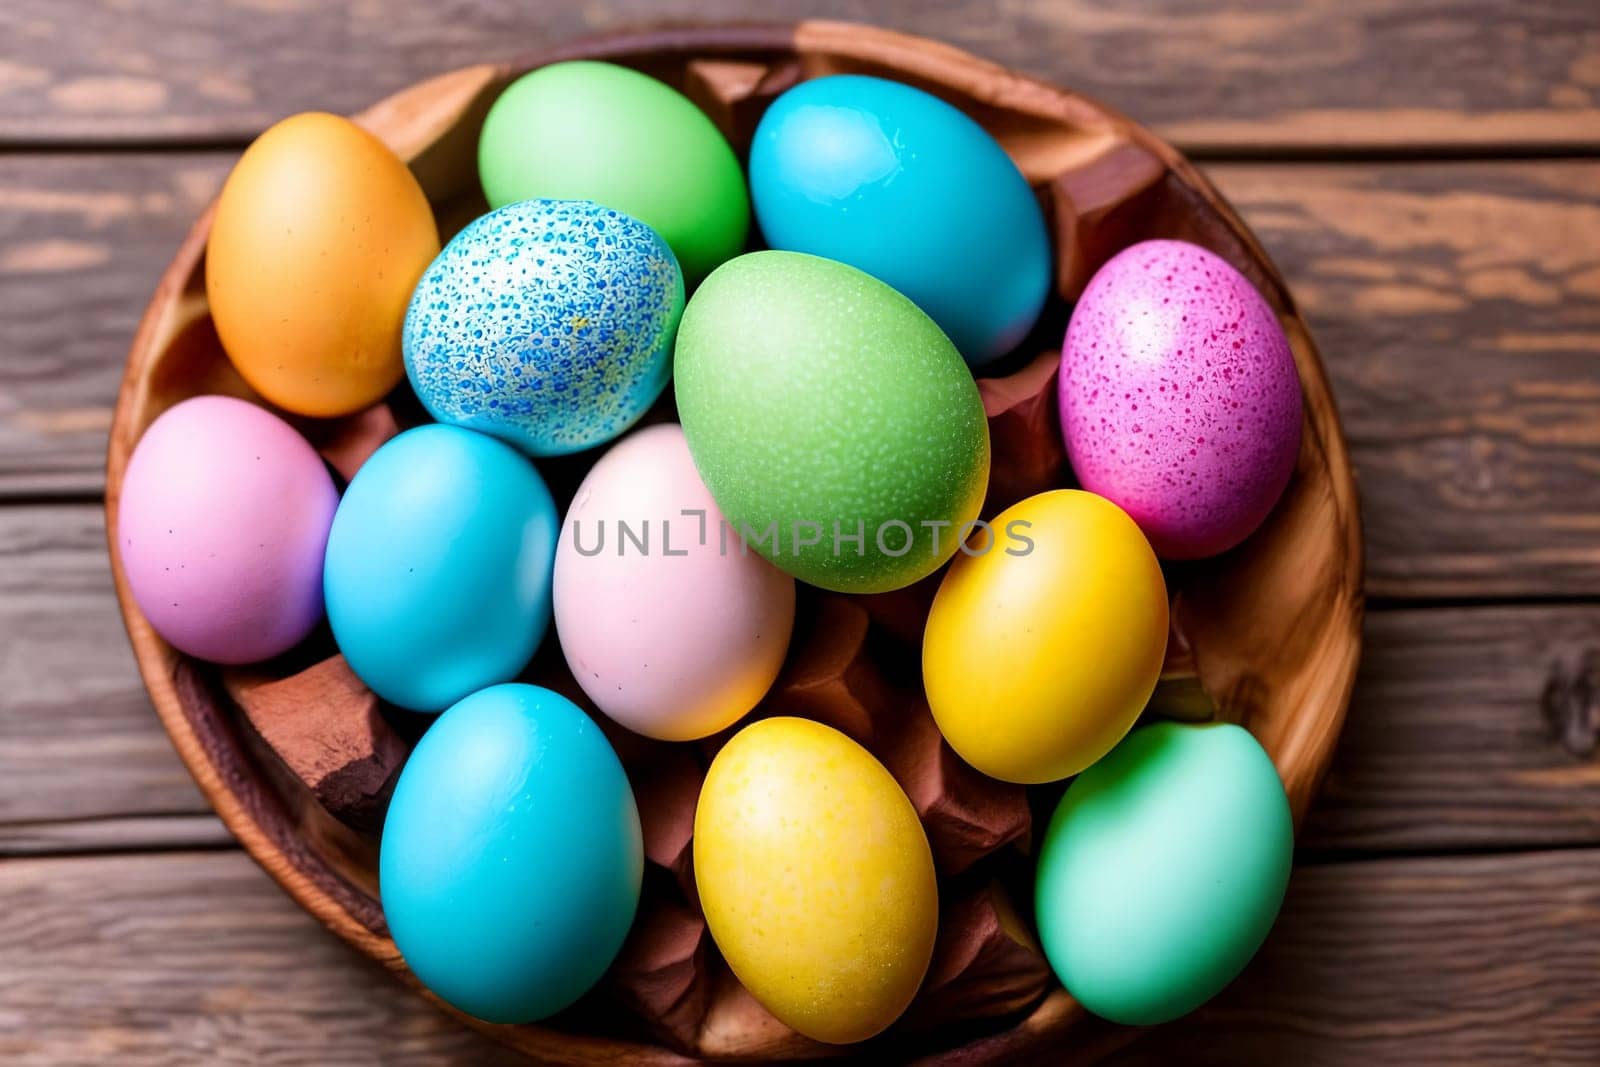 Vibrant Easter Eggs. A close-up image of colorful and intricately decorated Easter eggs by GoodOlga